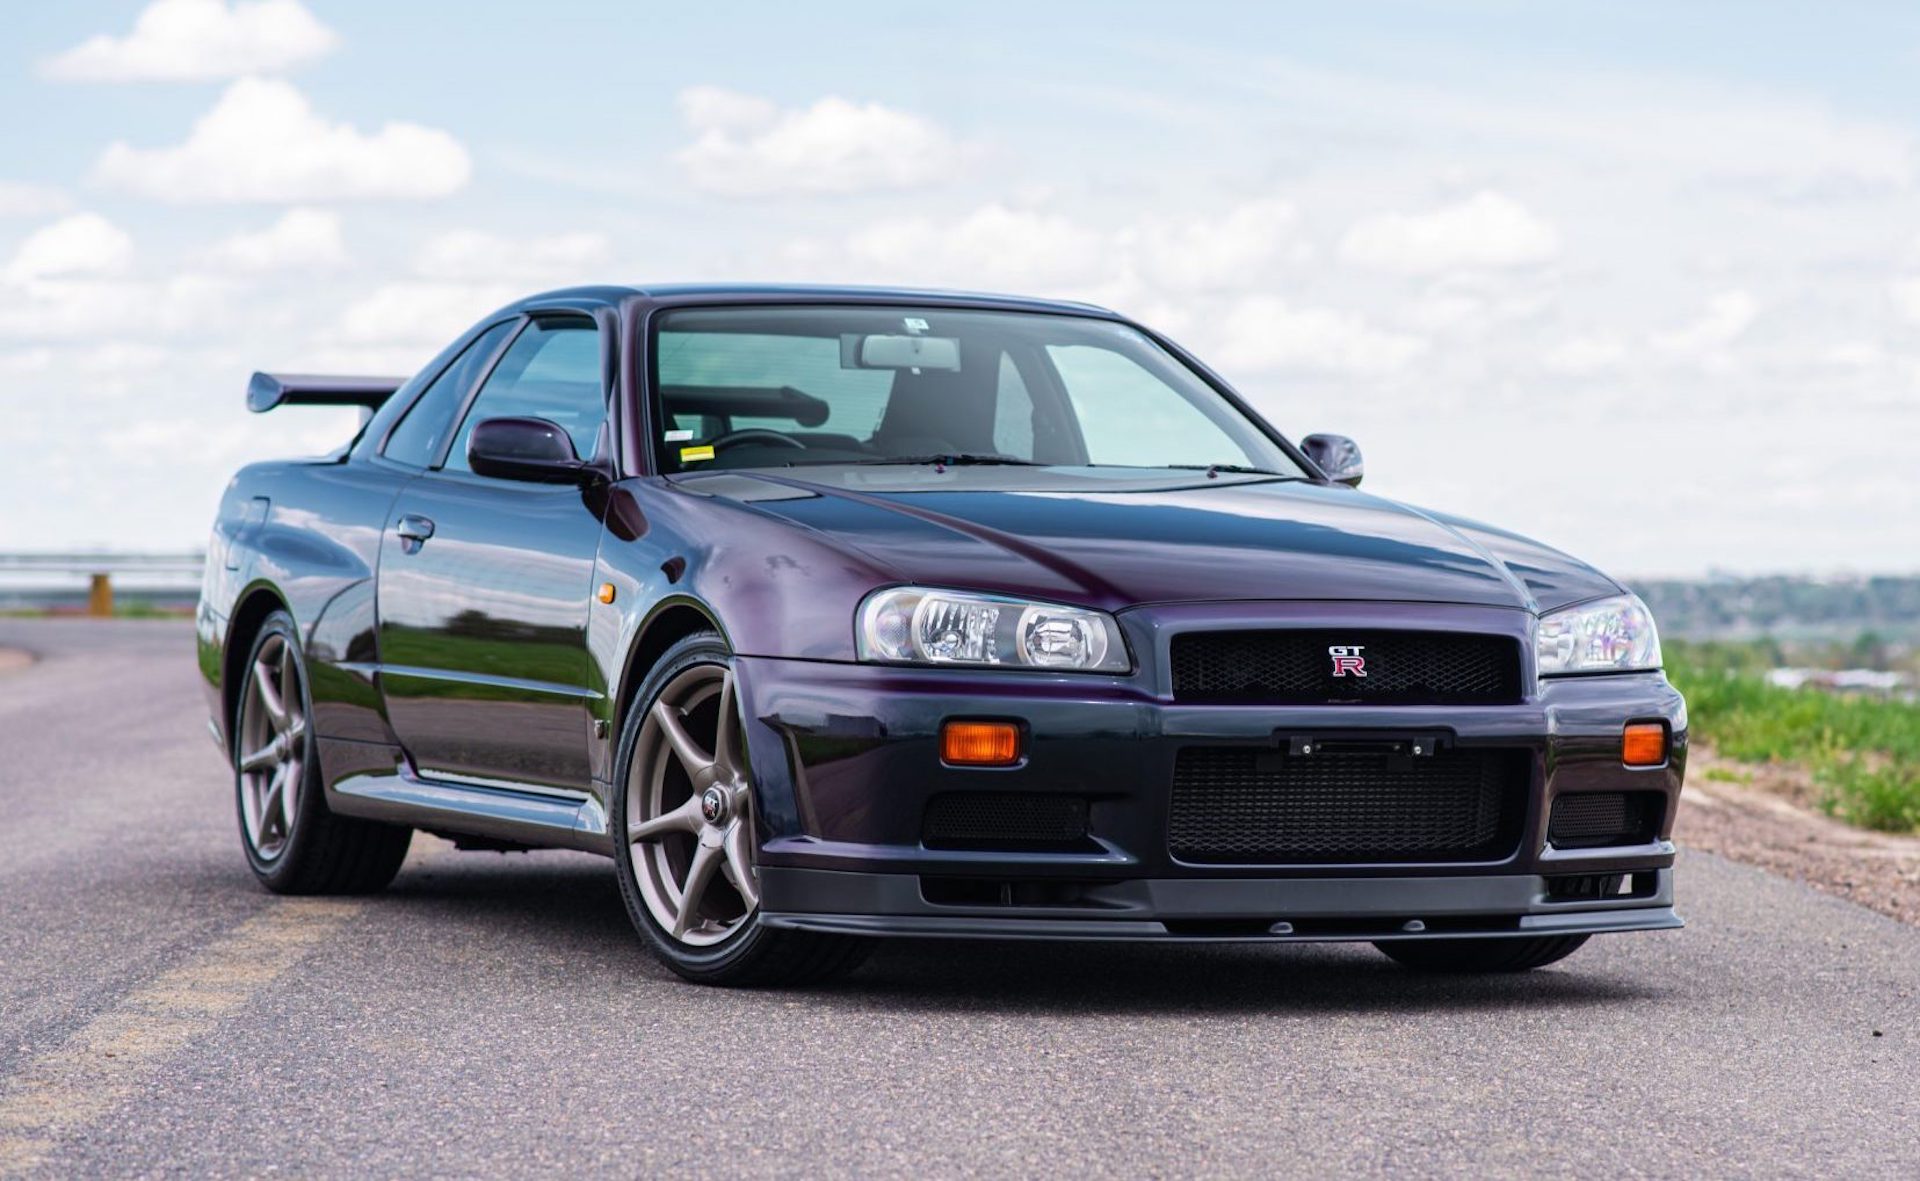 This Midnight Purple Ii 1999 Nissan Skyline Gt R Could Sell For 400k Carscoops